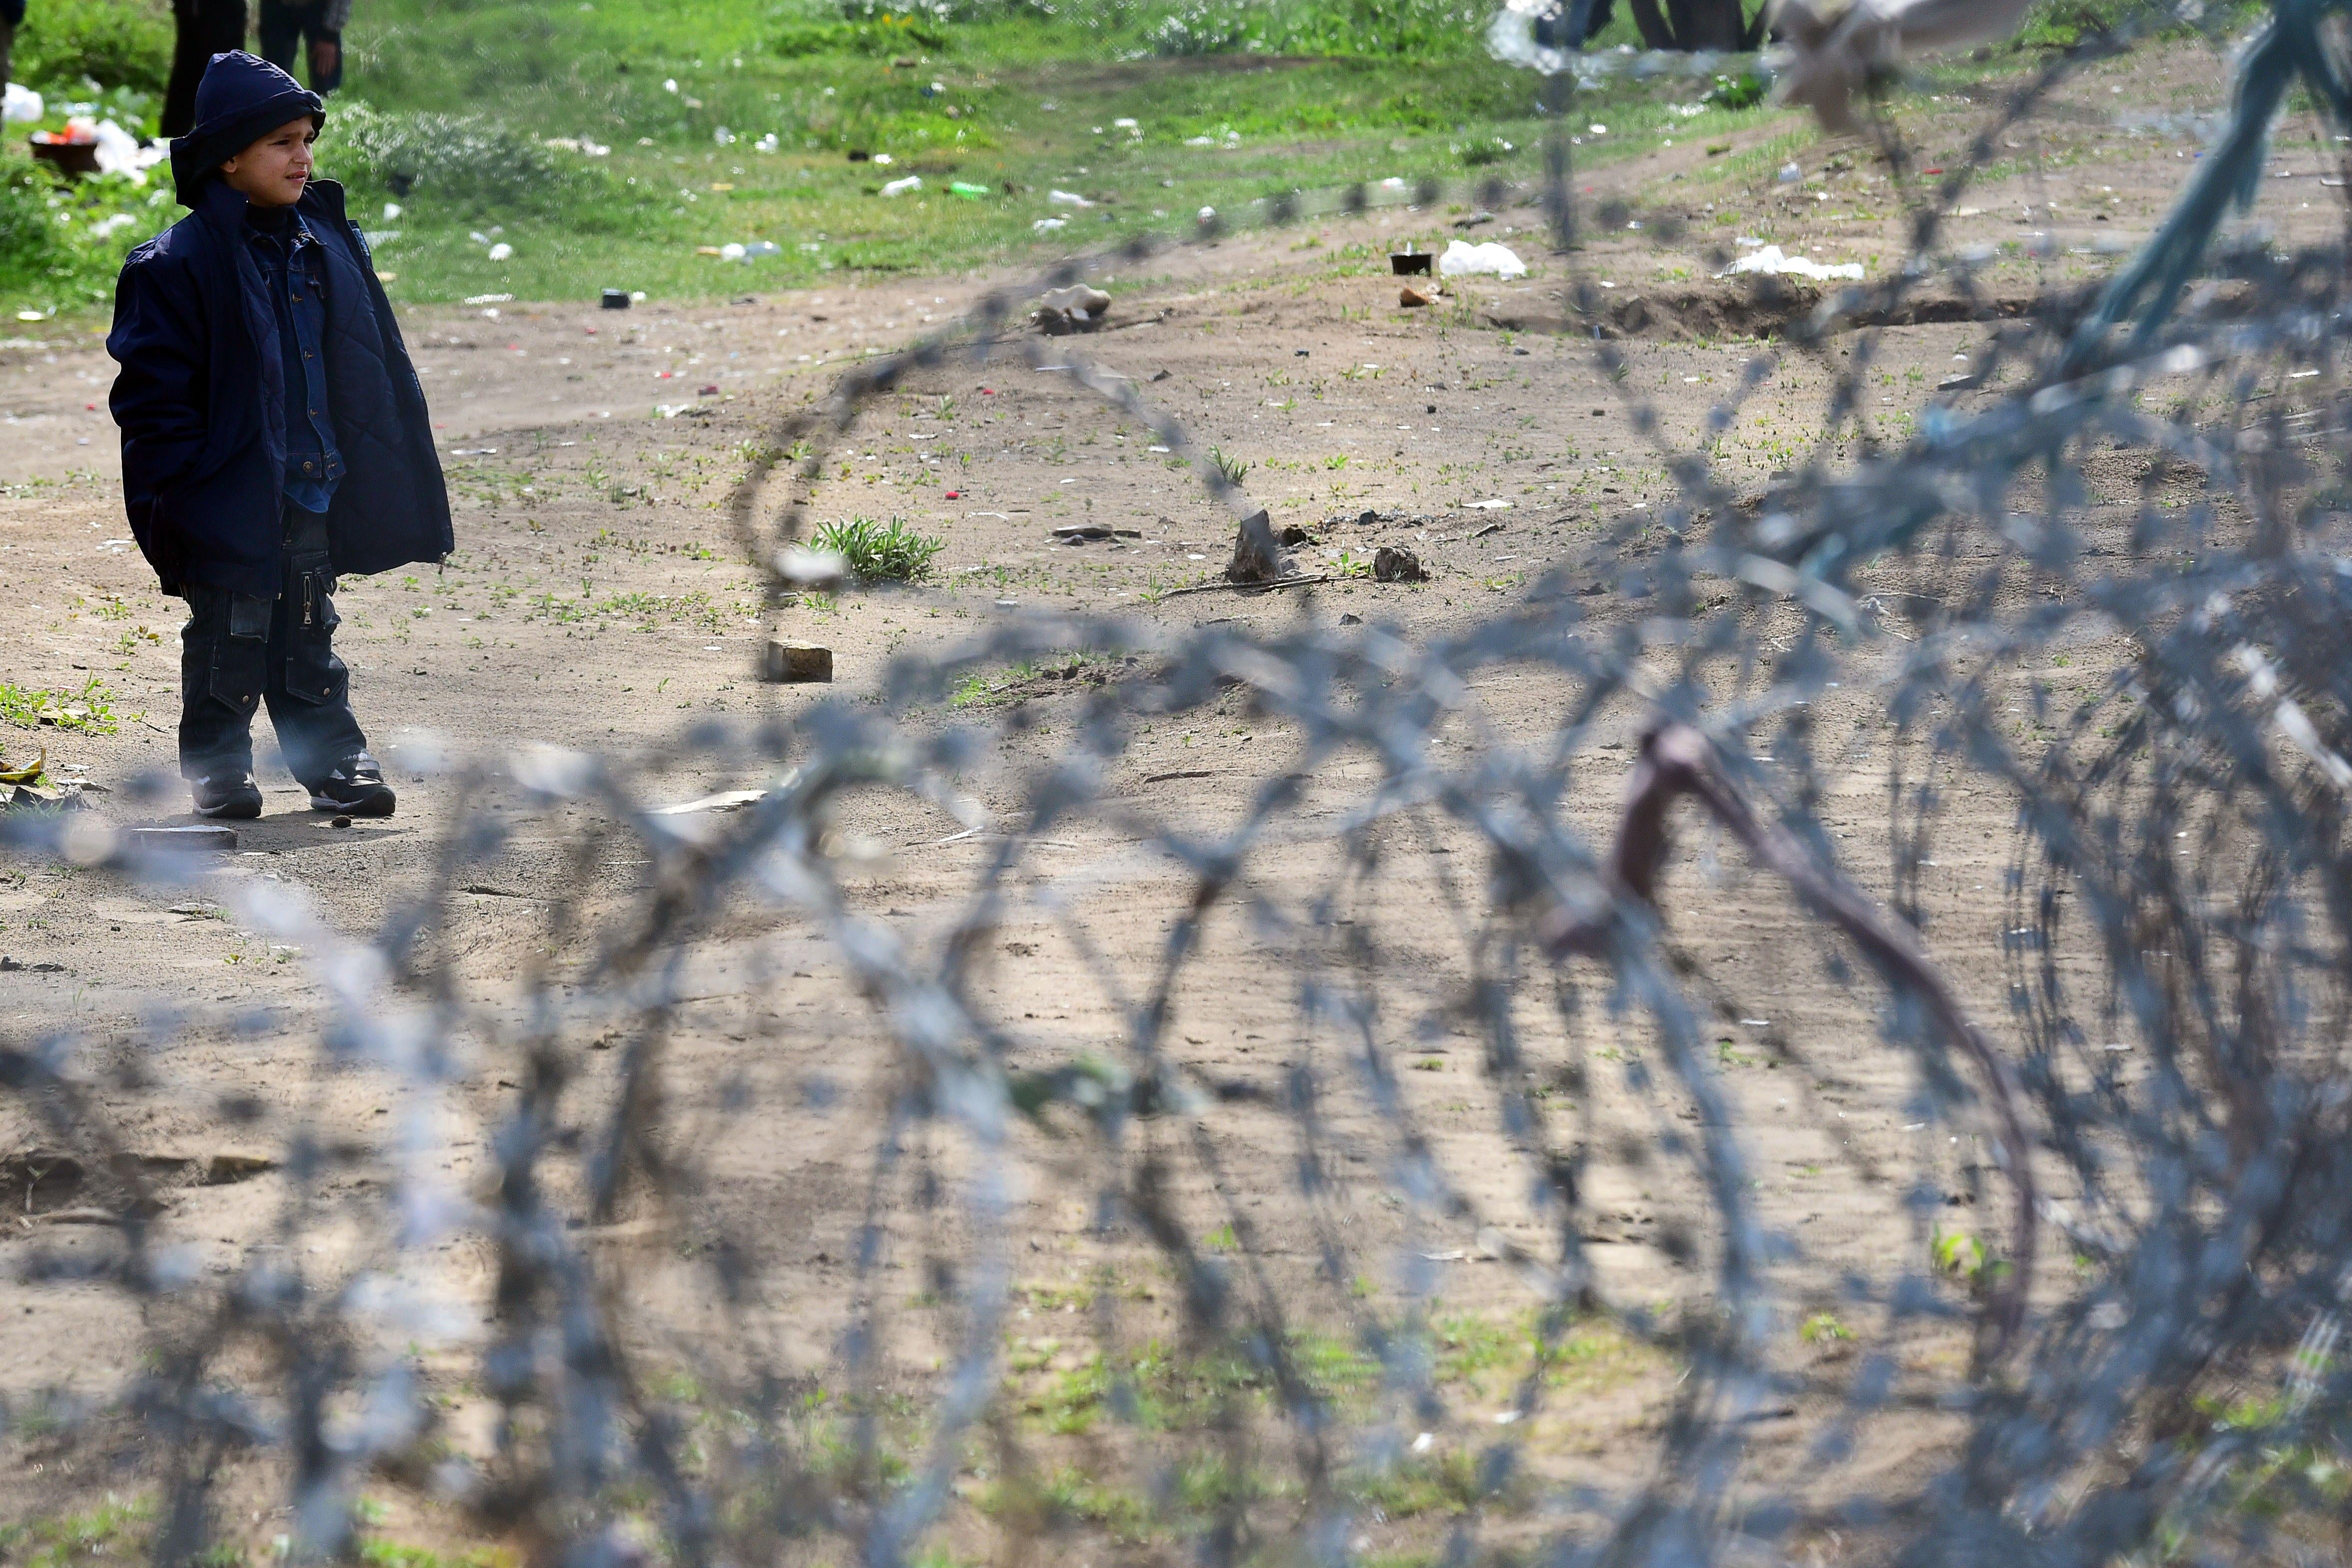 A young migrant boy stands behind a barbed wire fence.